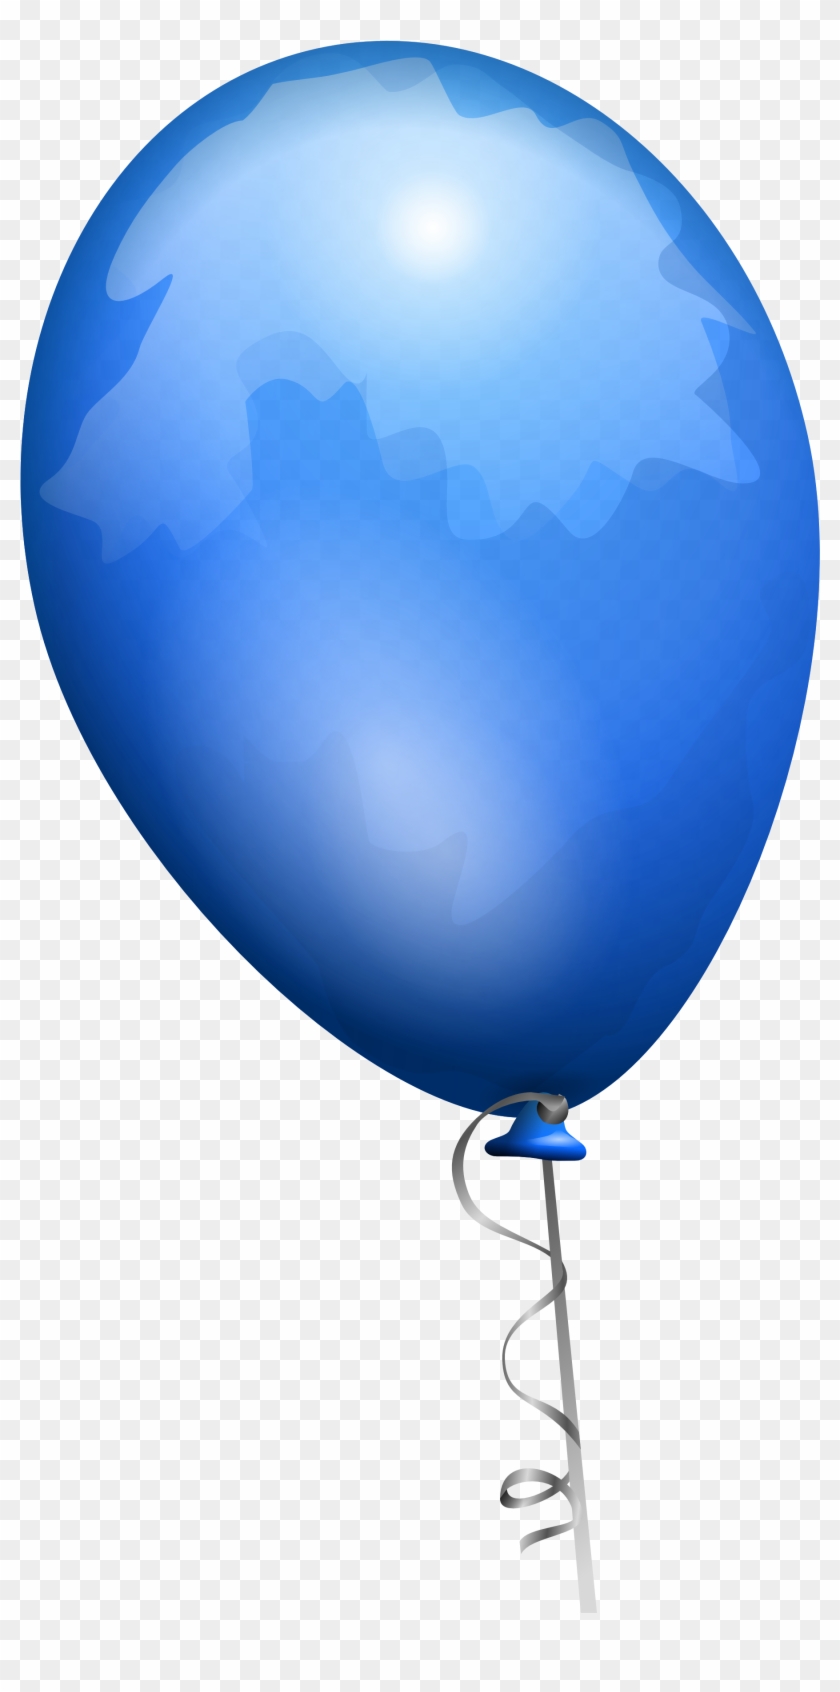 Balloon Png Images, Free Picture Download With Transparency - Protecting Your Online Reputation #275457